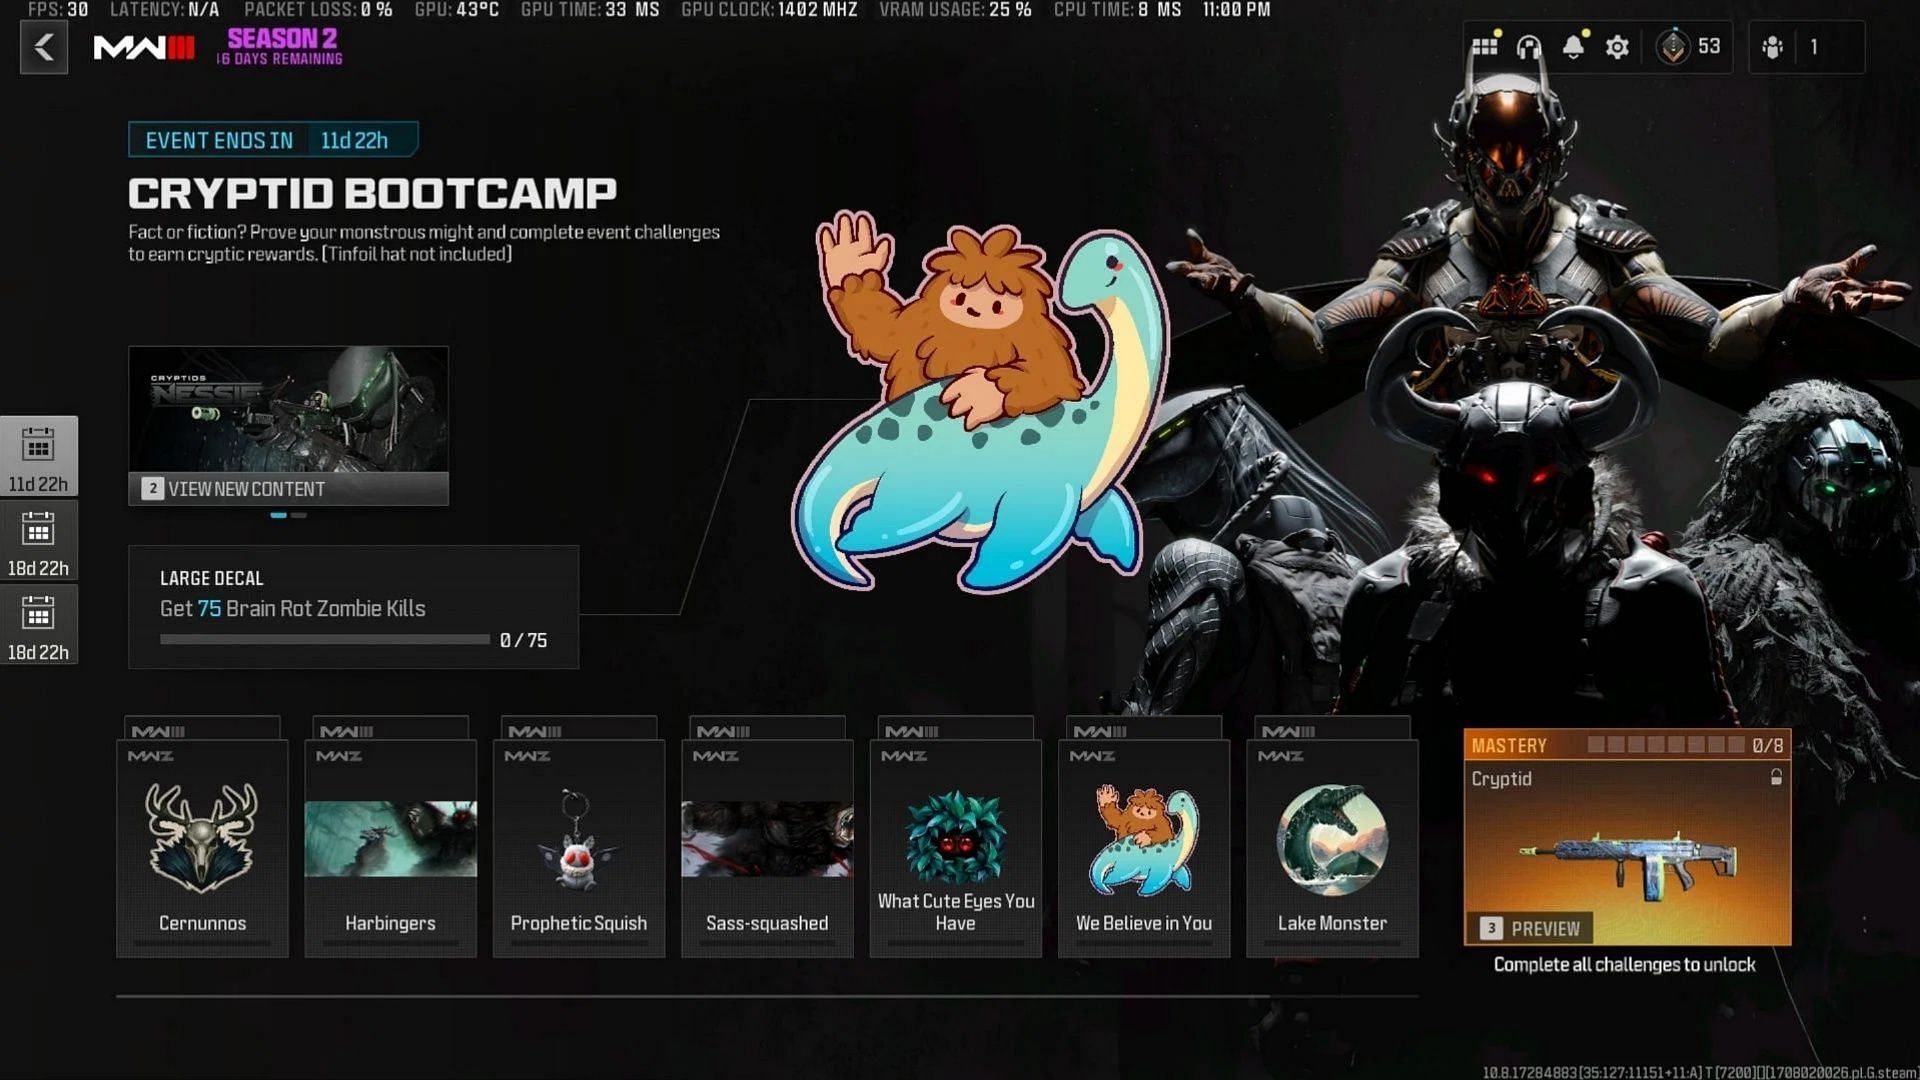 Cryptid Bootcamp event in MW3 (Image via Activision)